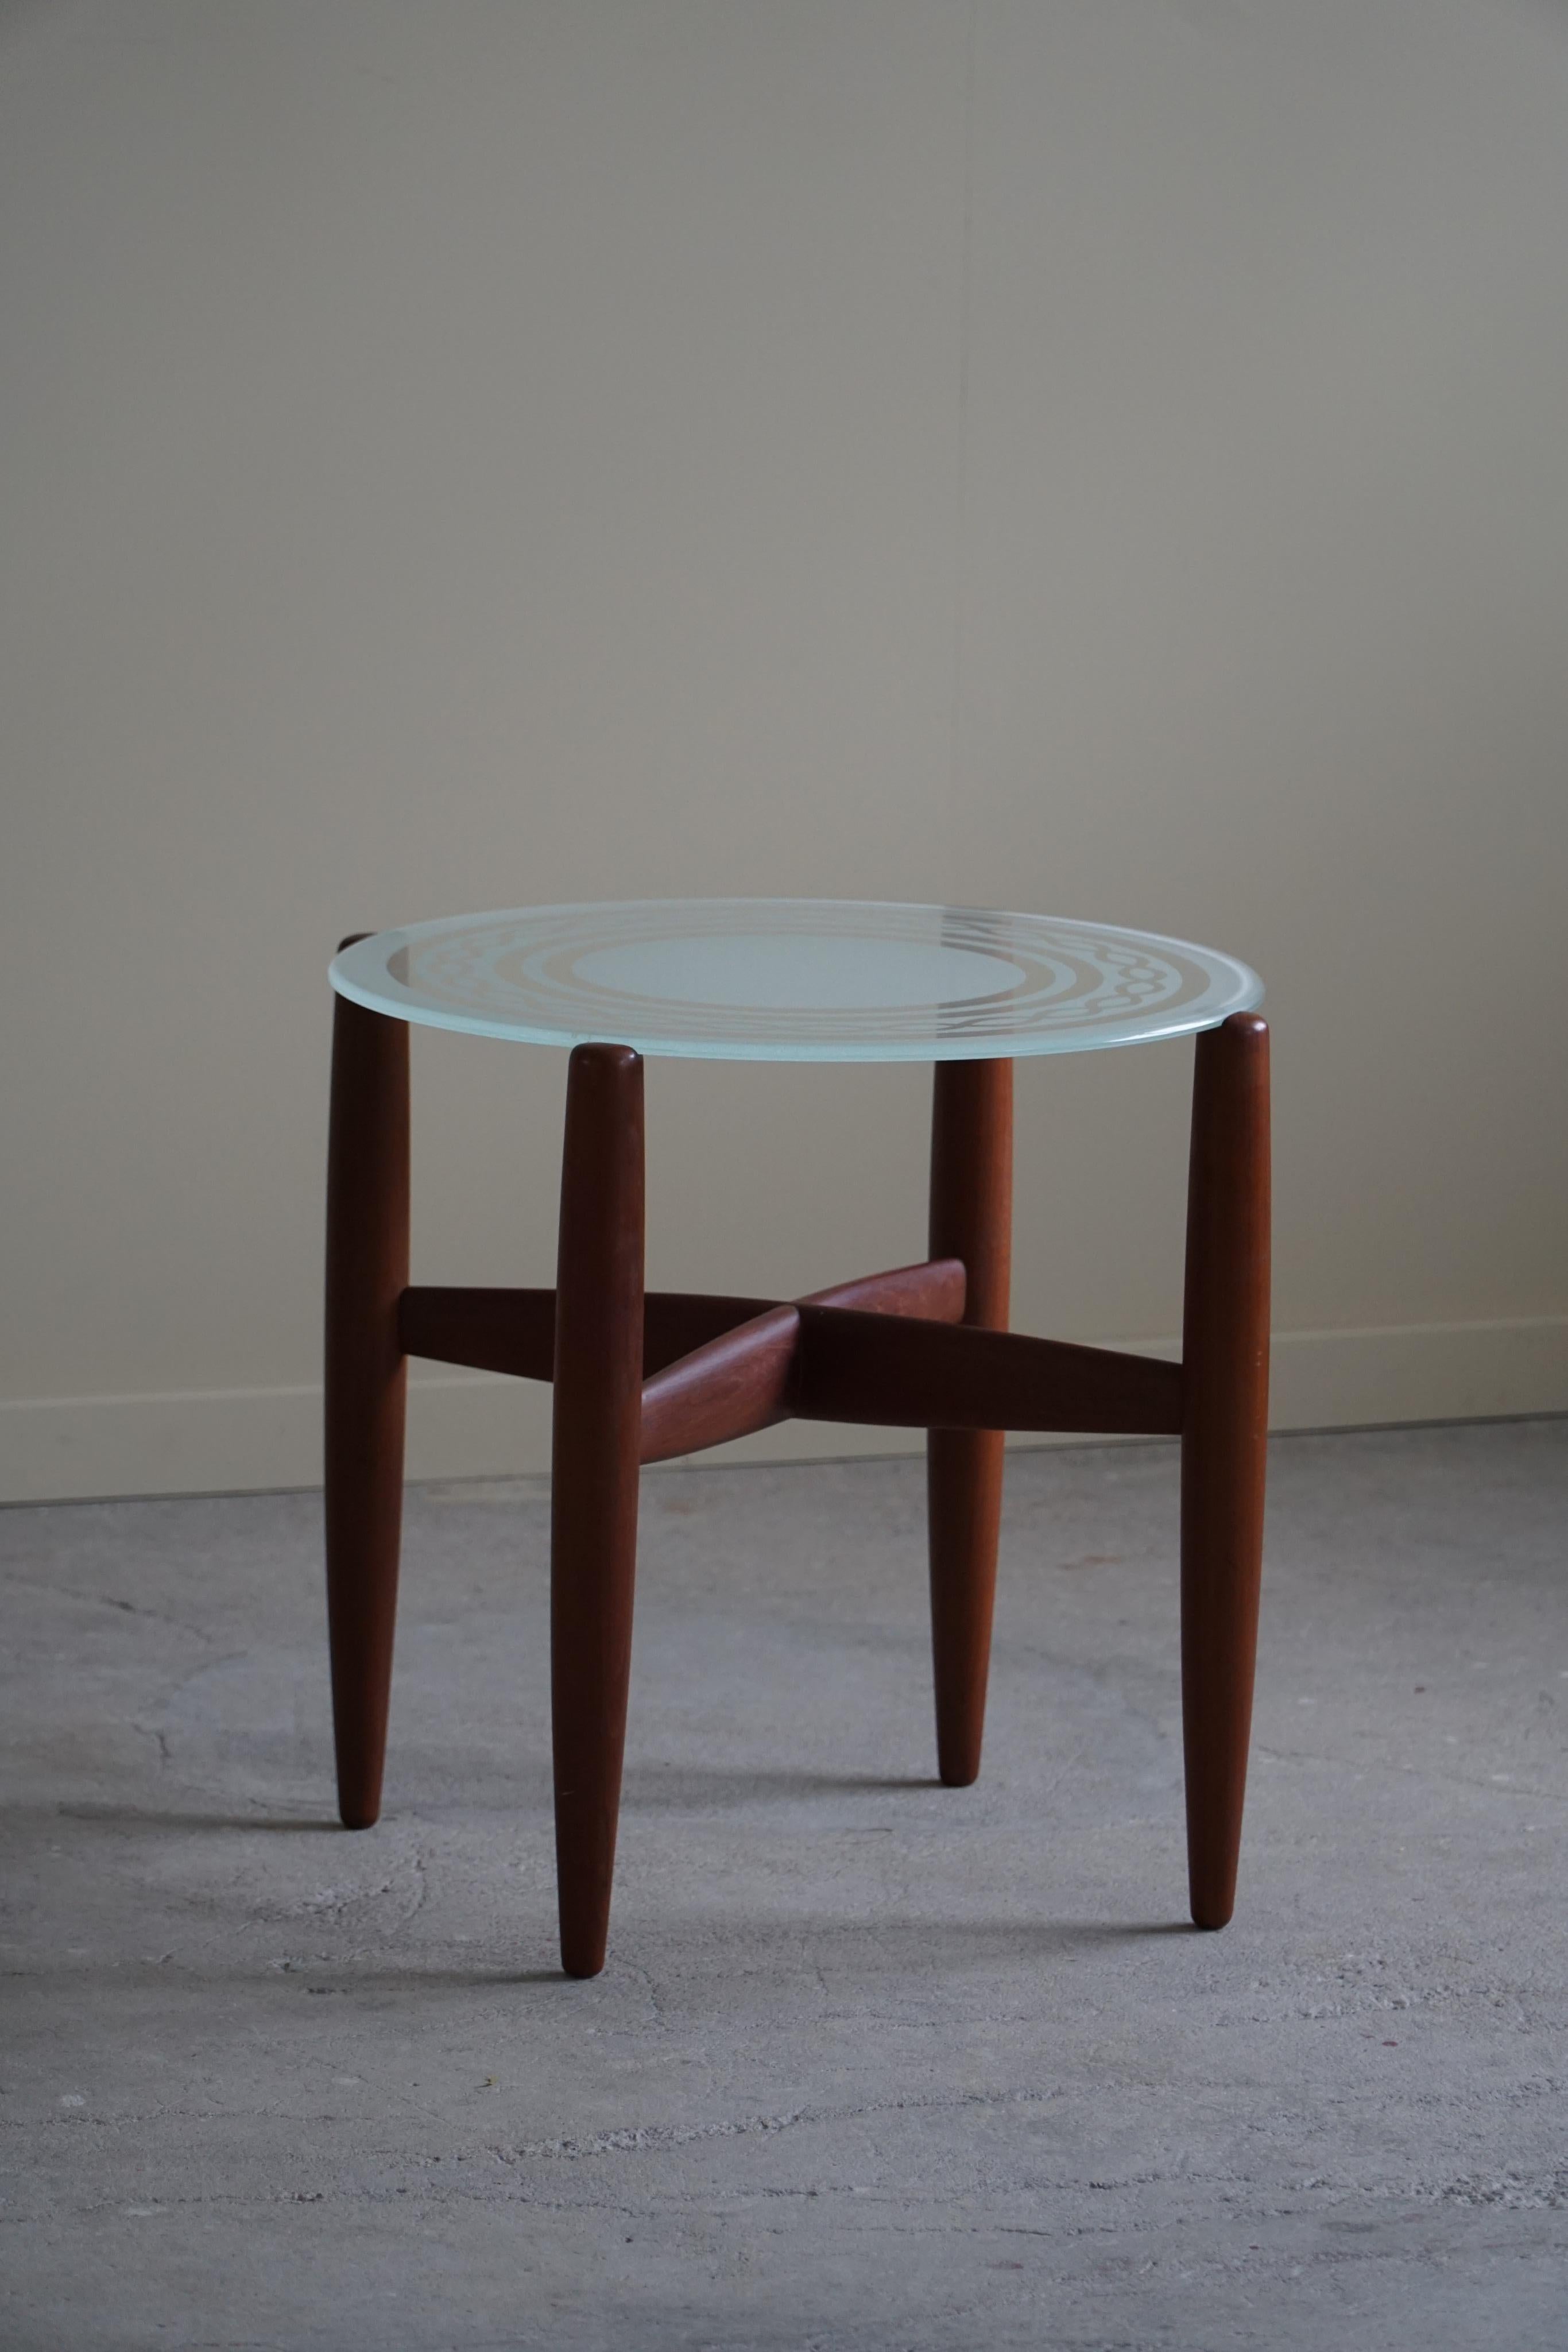 Side Table in Teak & Glass, Danish Mid Century Modern, Made in the 1960s For Sale 5